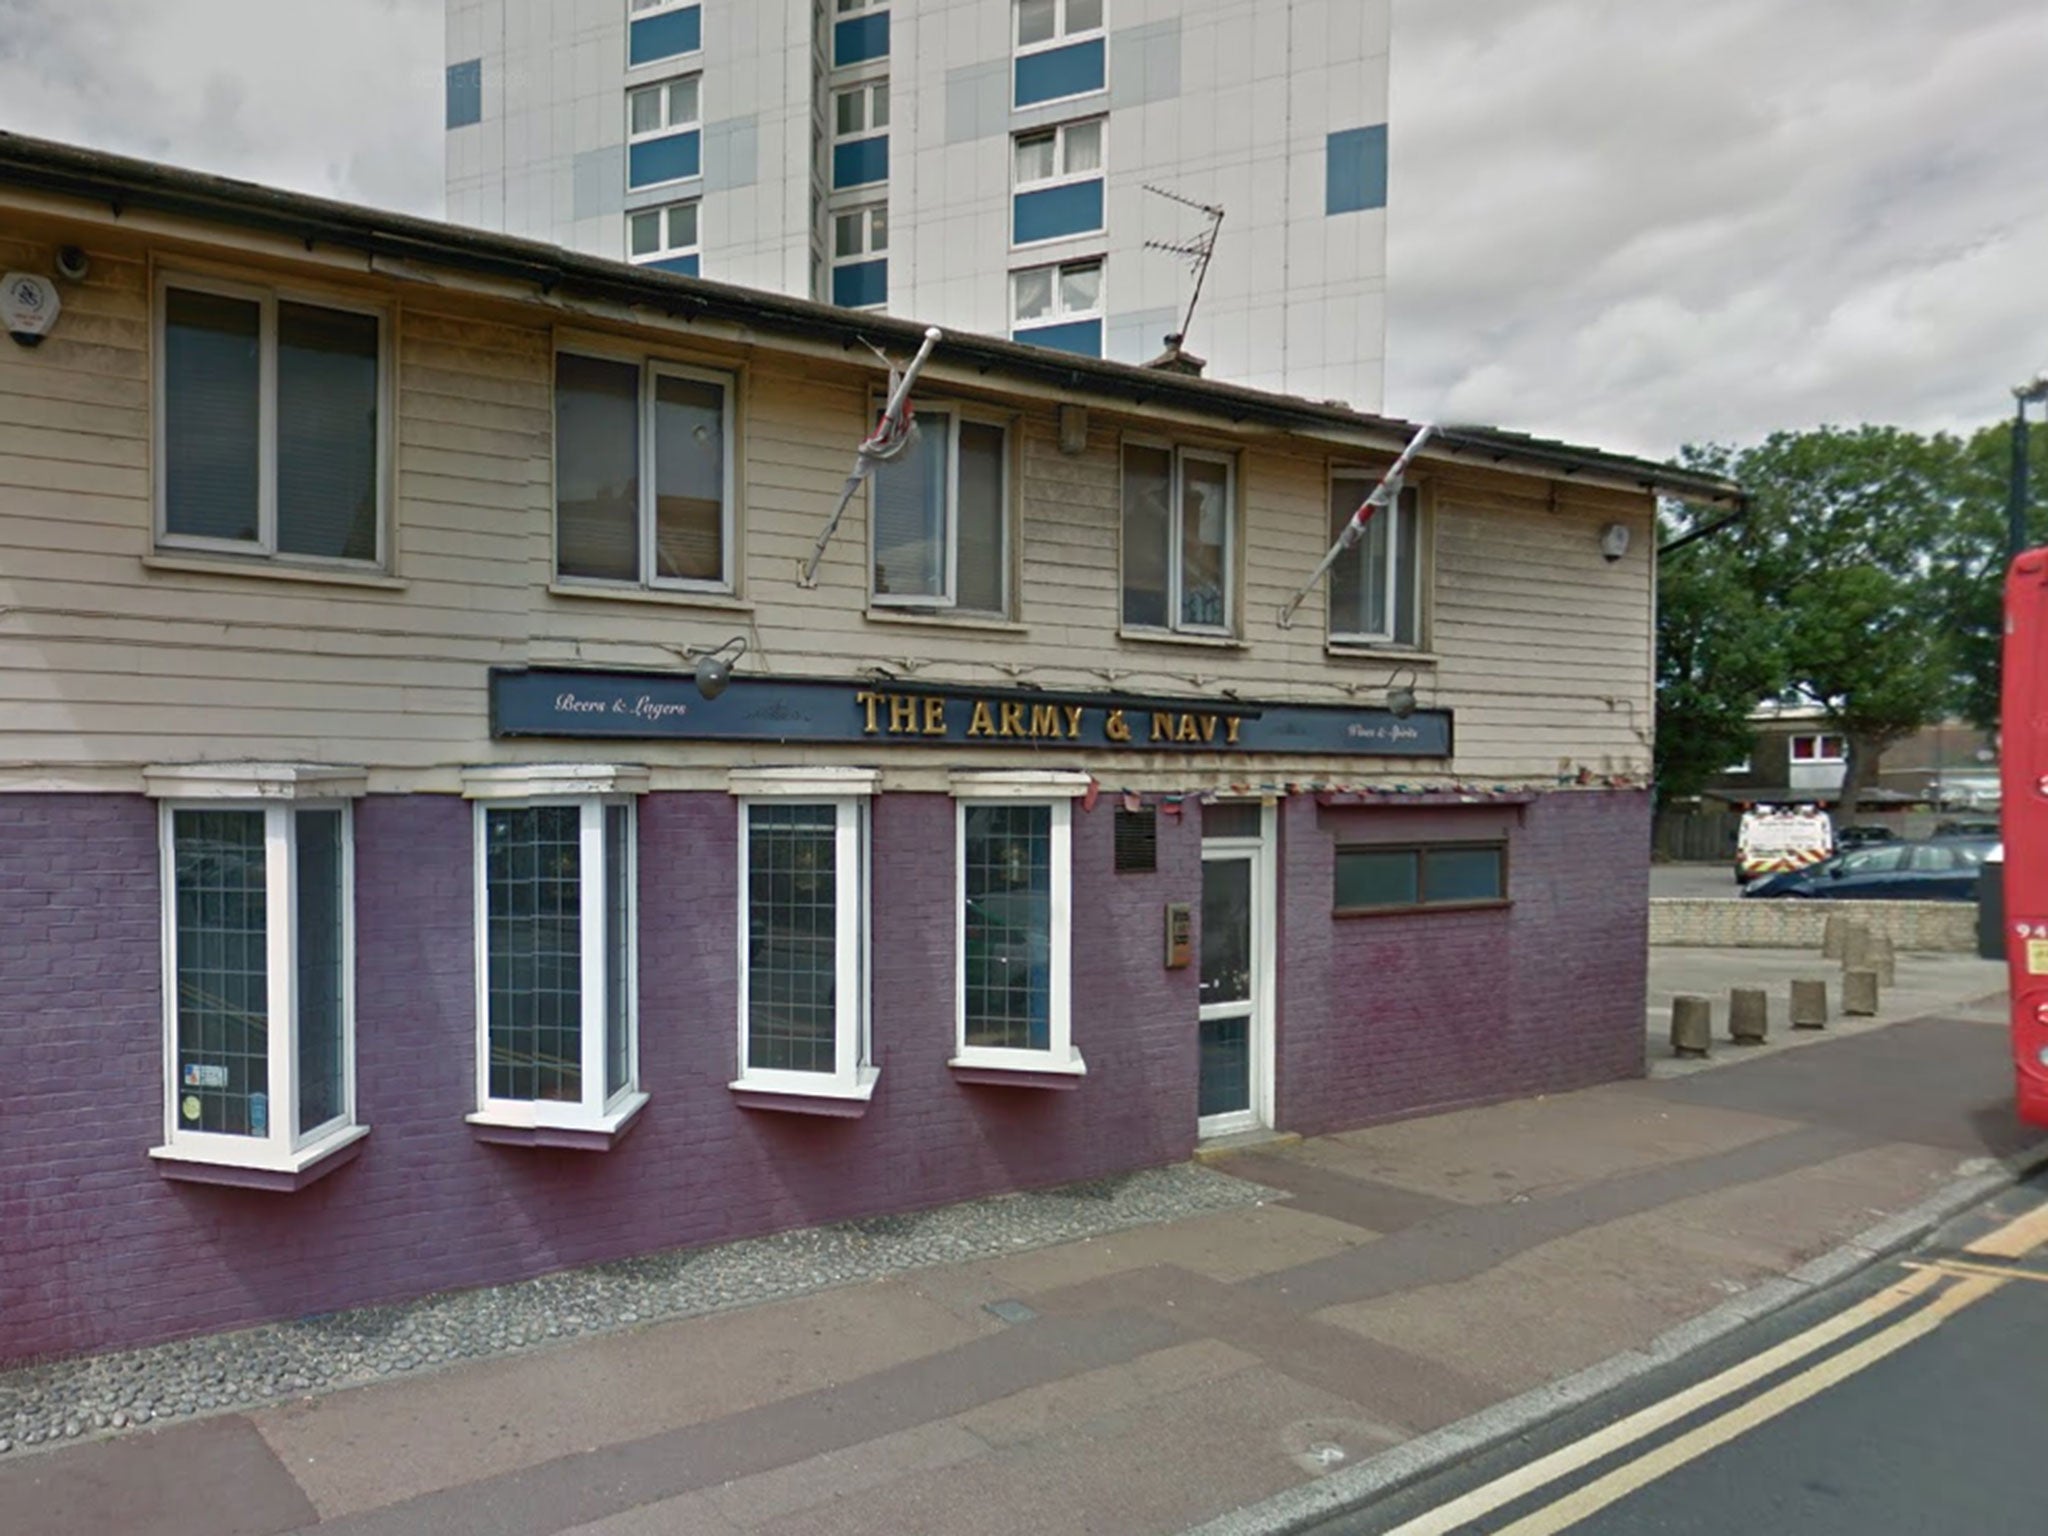 Edward Stokes was killed and three other men suffered stab wounds during a fight at the Army & Navy pub in Newham